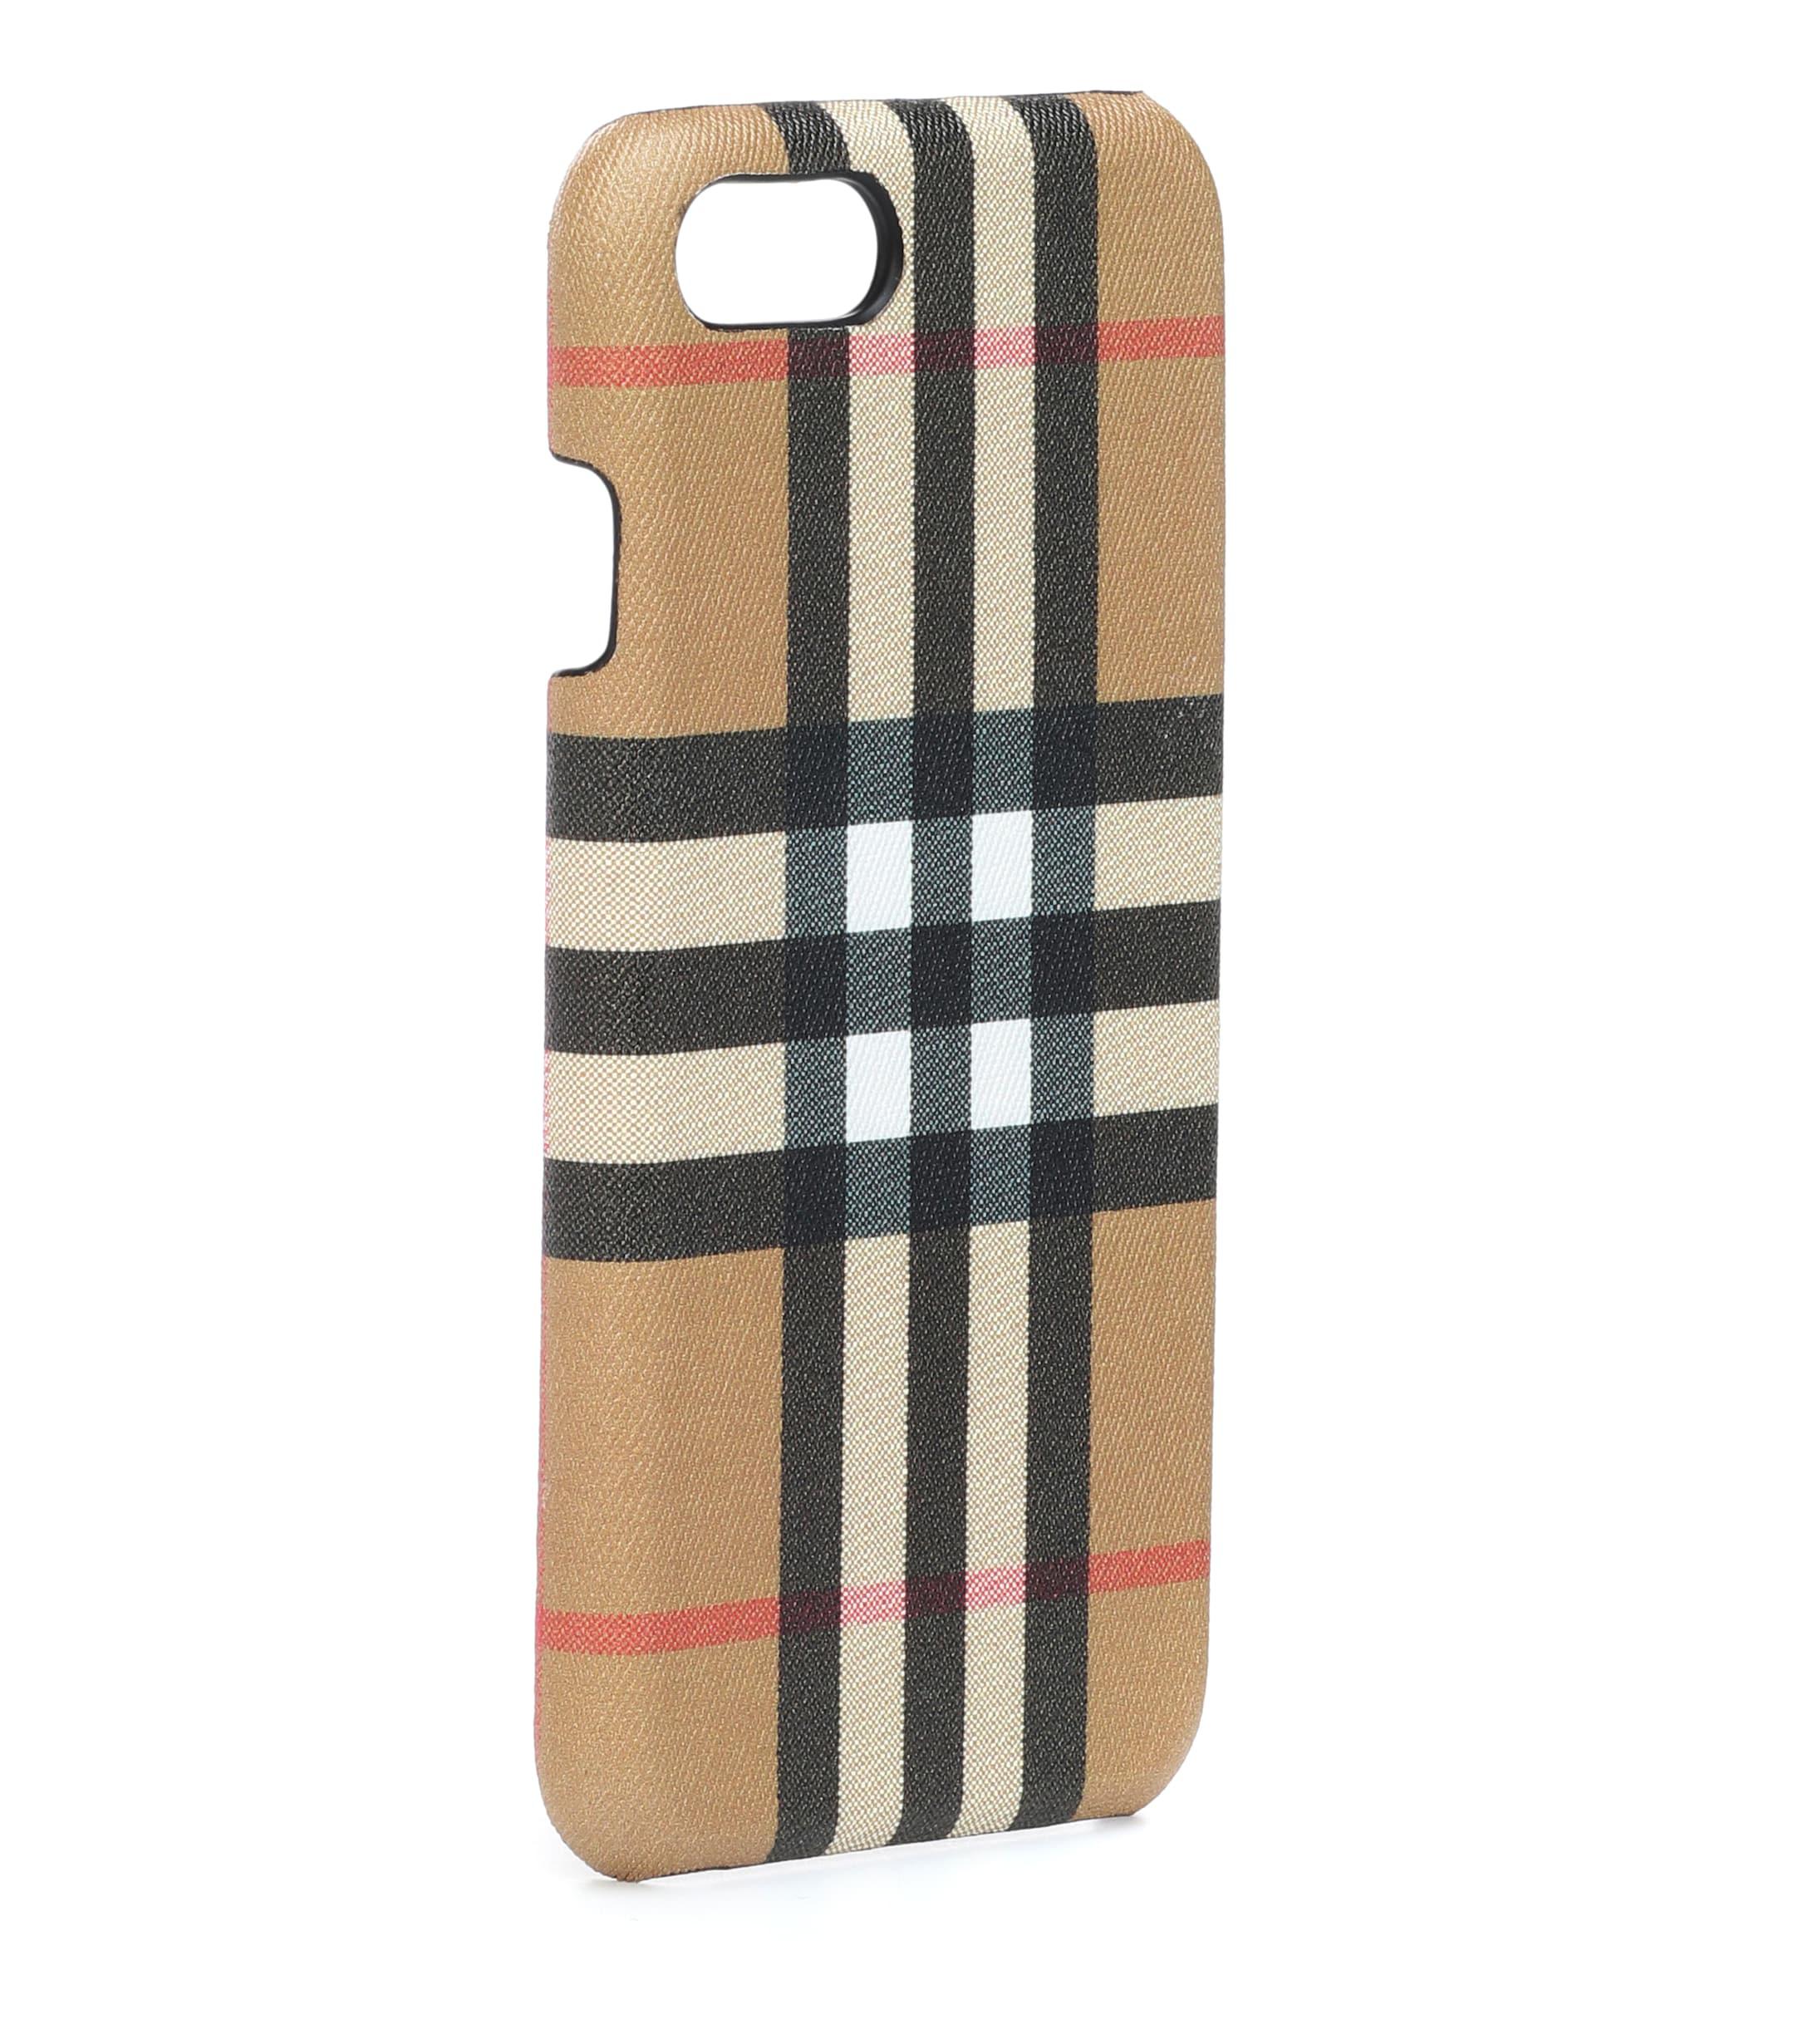 Burberry Case Iphone Flash Sales, 59% OFF | lagence.tv